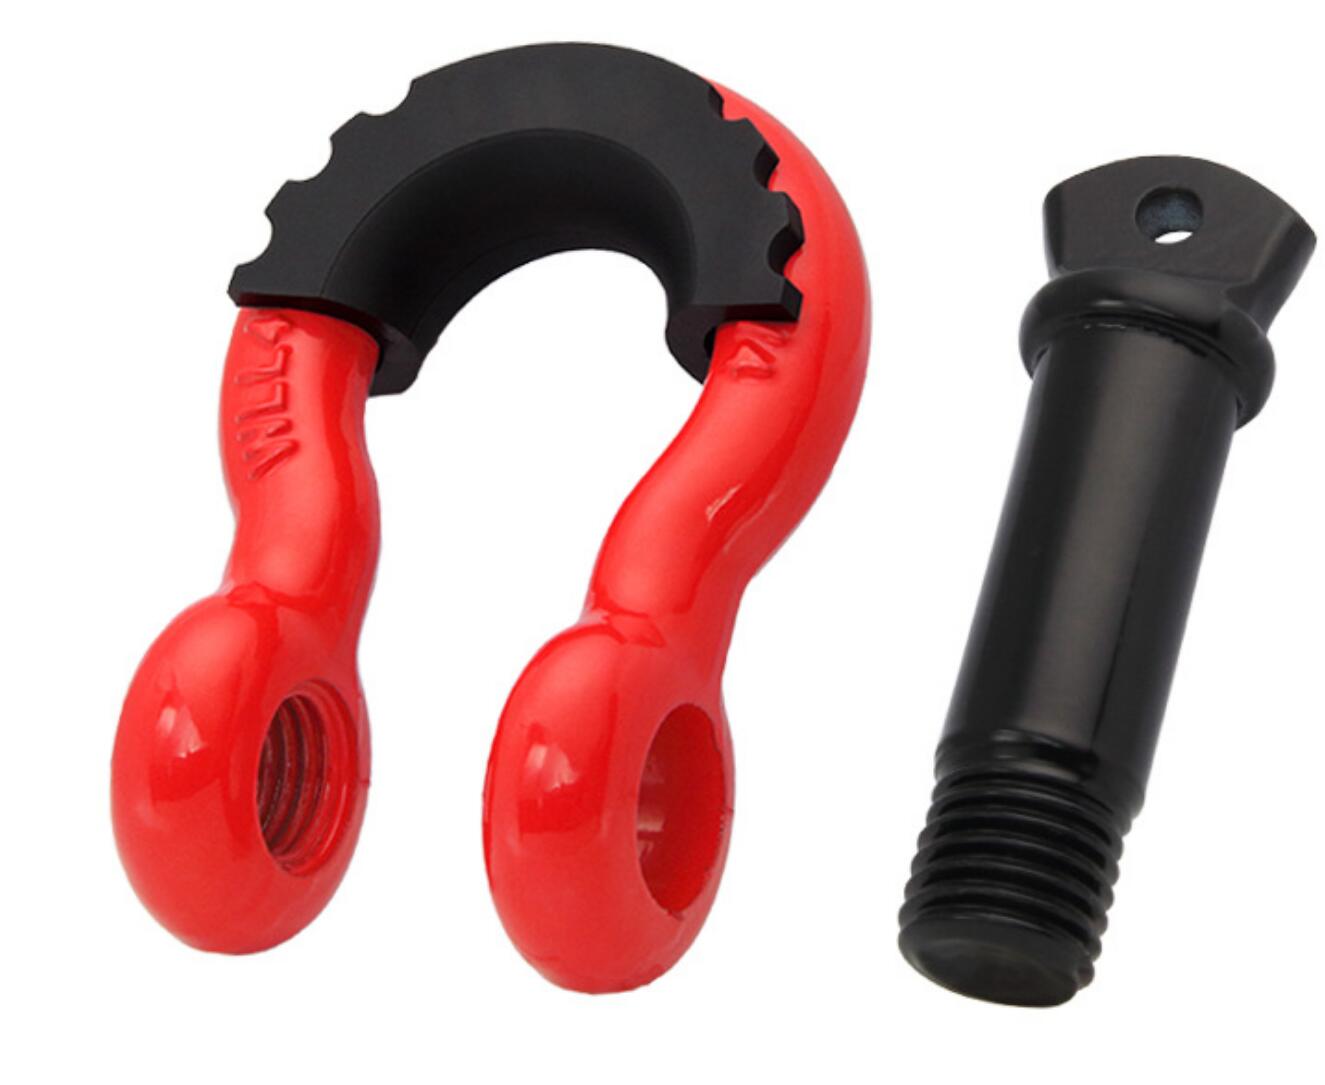 Drop Forged Heavy Duty Towing Shackle with Rubber Protective Sleeve